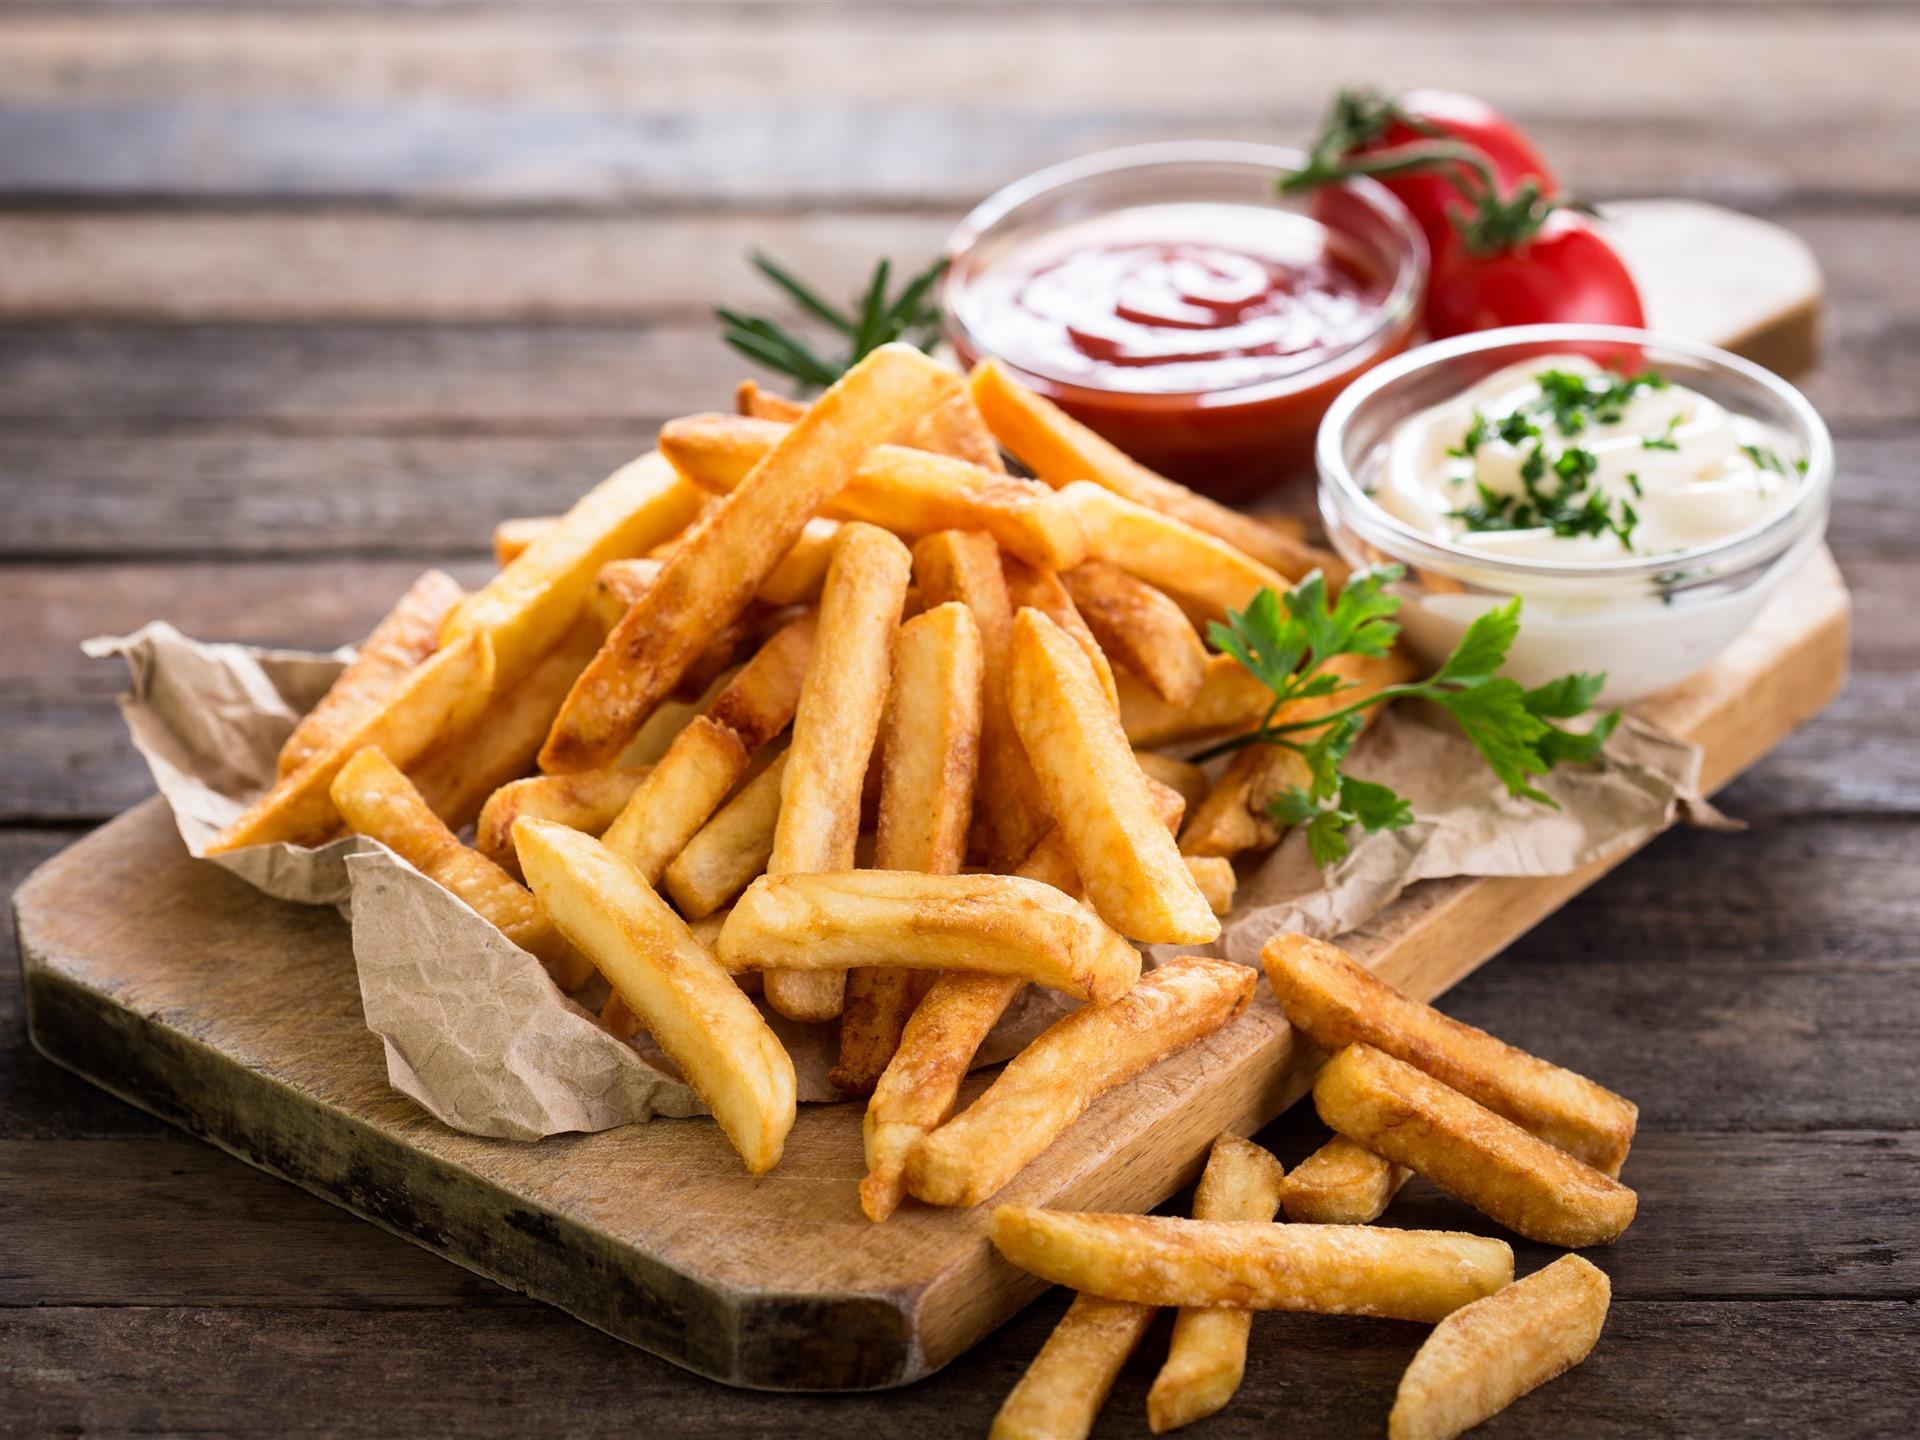 Wallpaper Food, french fries, tomatoes 5120x2880 UHD 5K Picture, Image